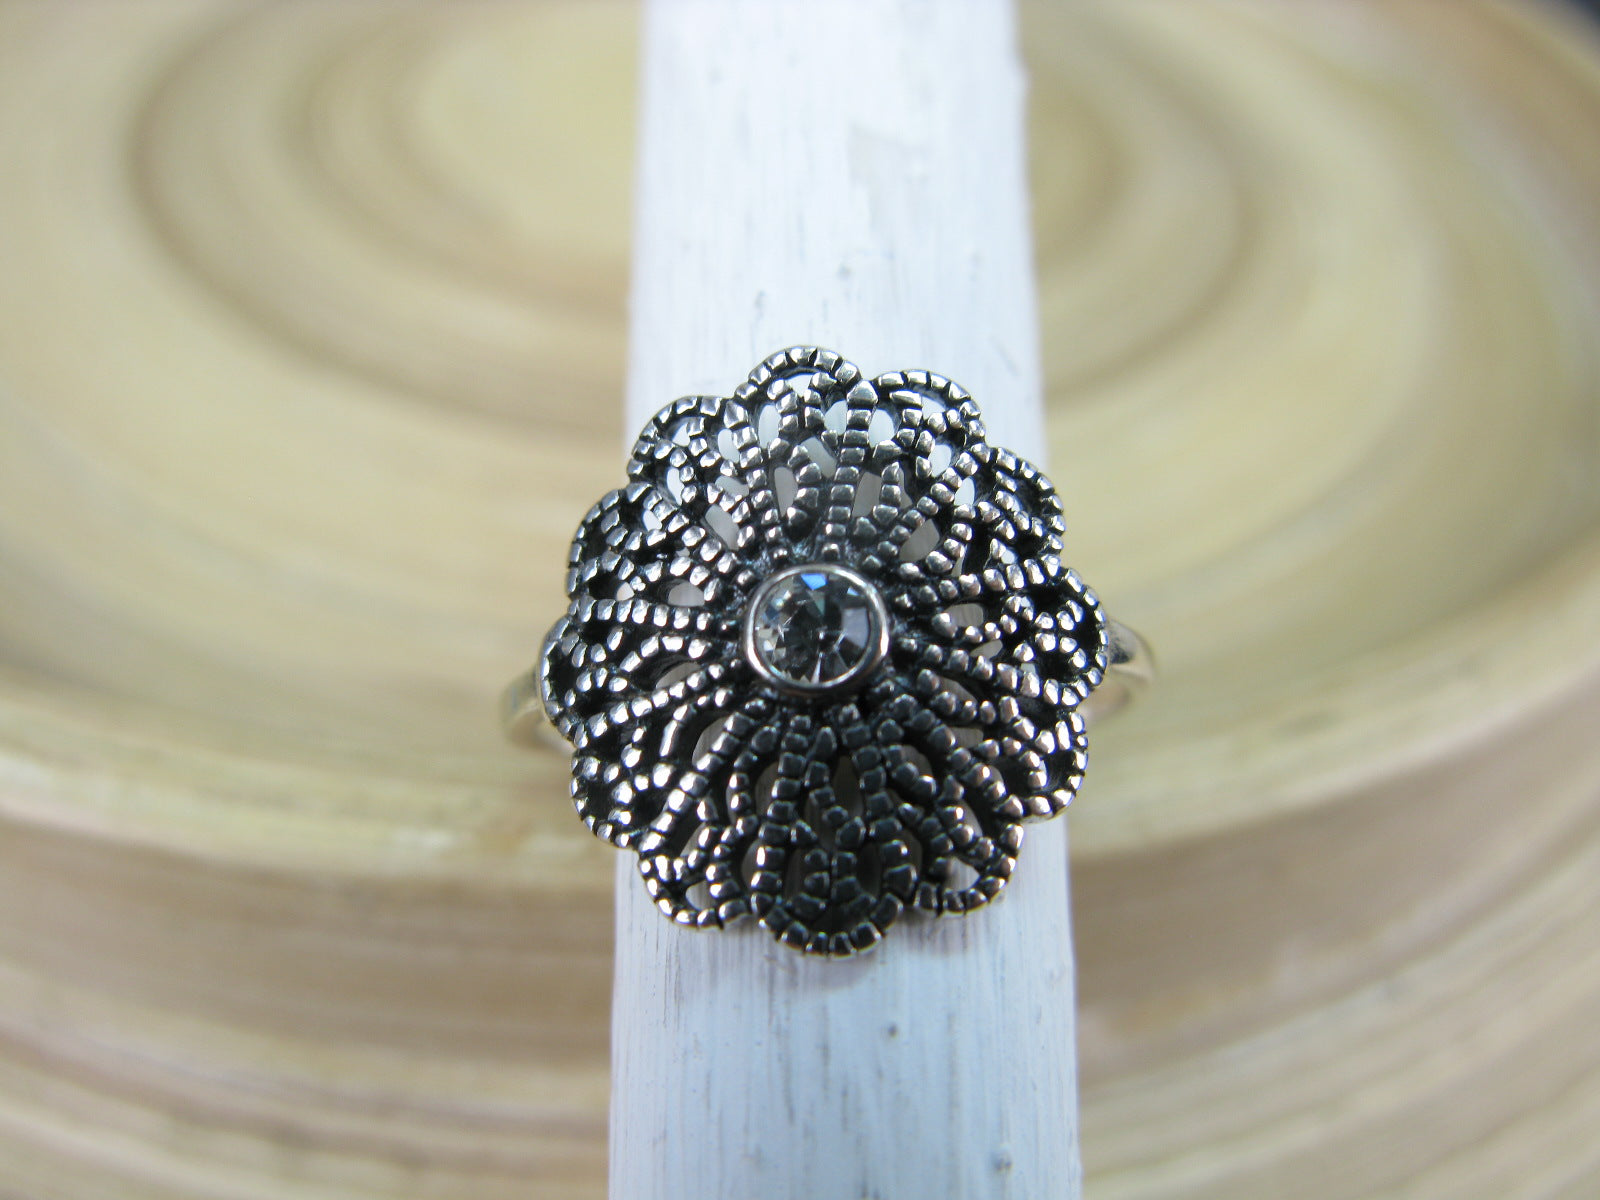 Filigree Flower Oxidized Ring in 925 Sterling Silver